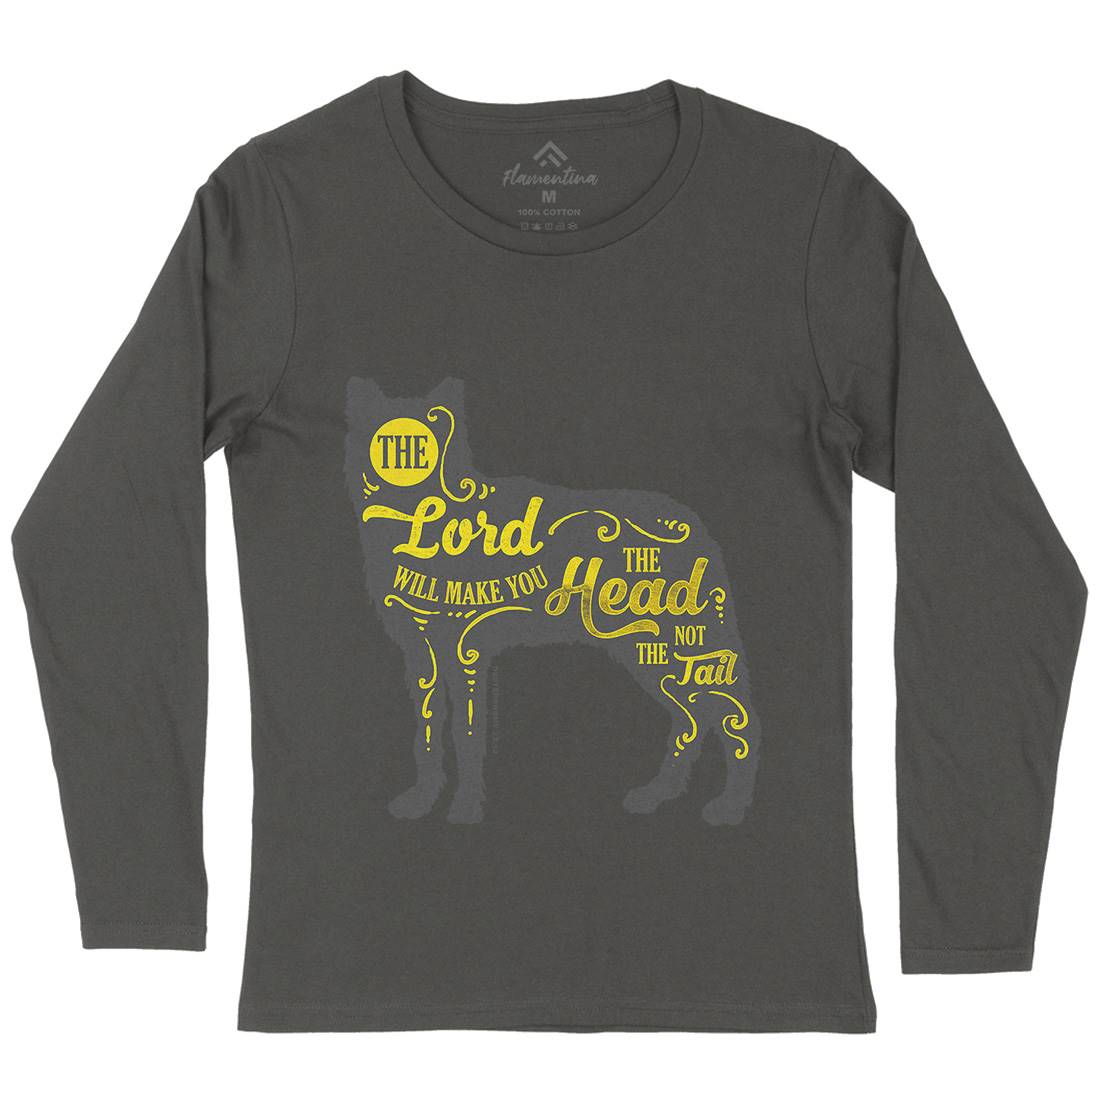 Head Not The Tail Womens Long Sleeve T-Shirt Religion A326